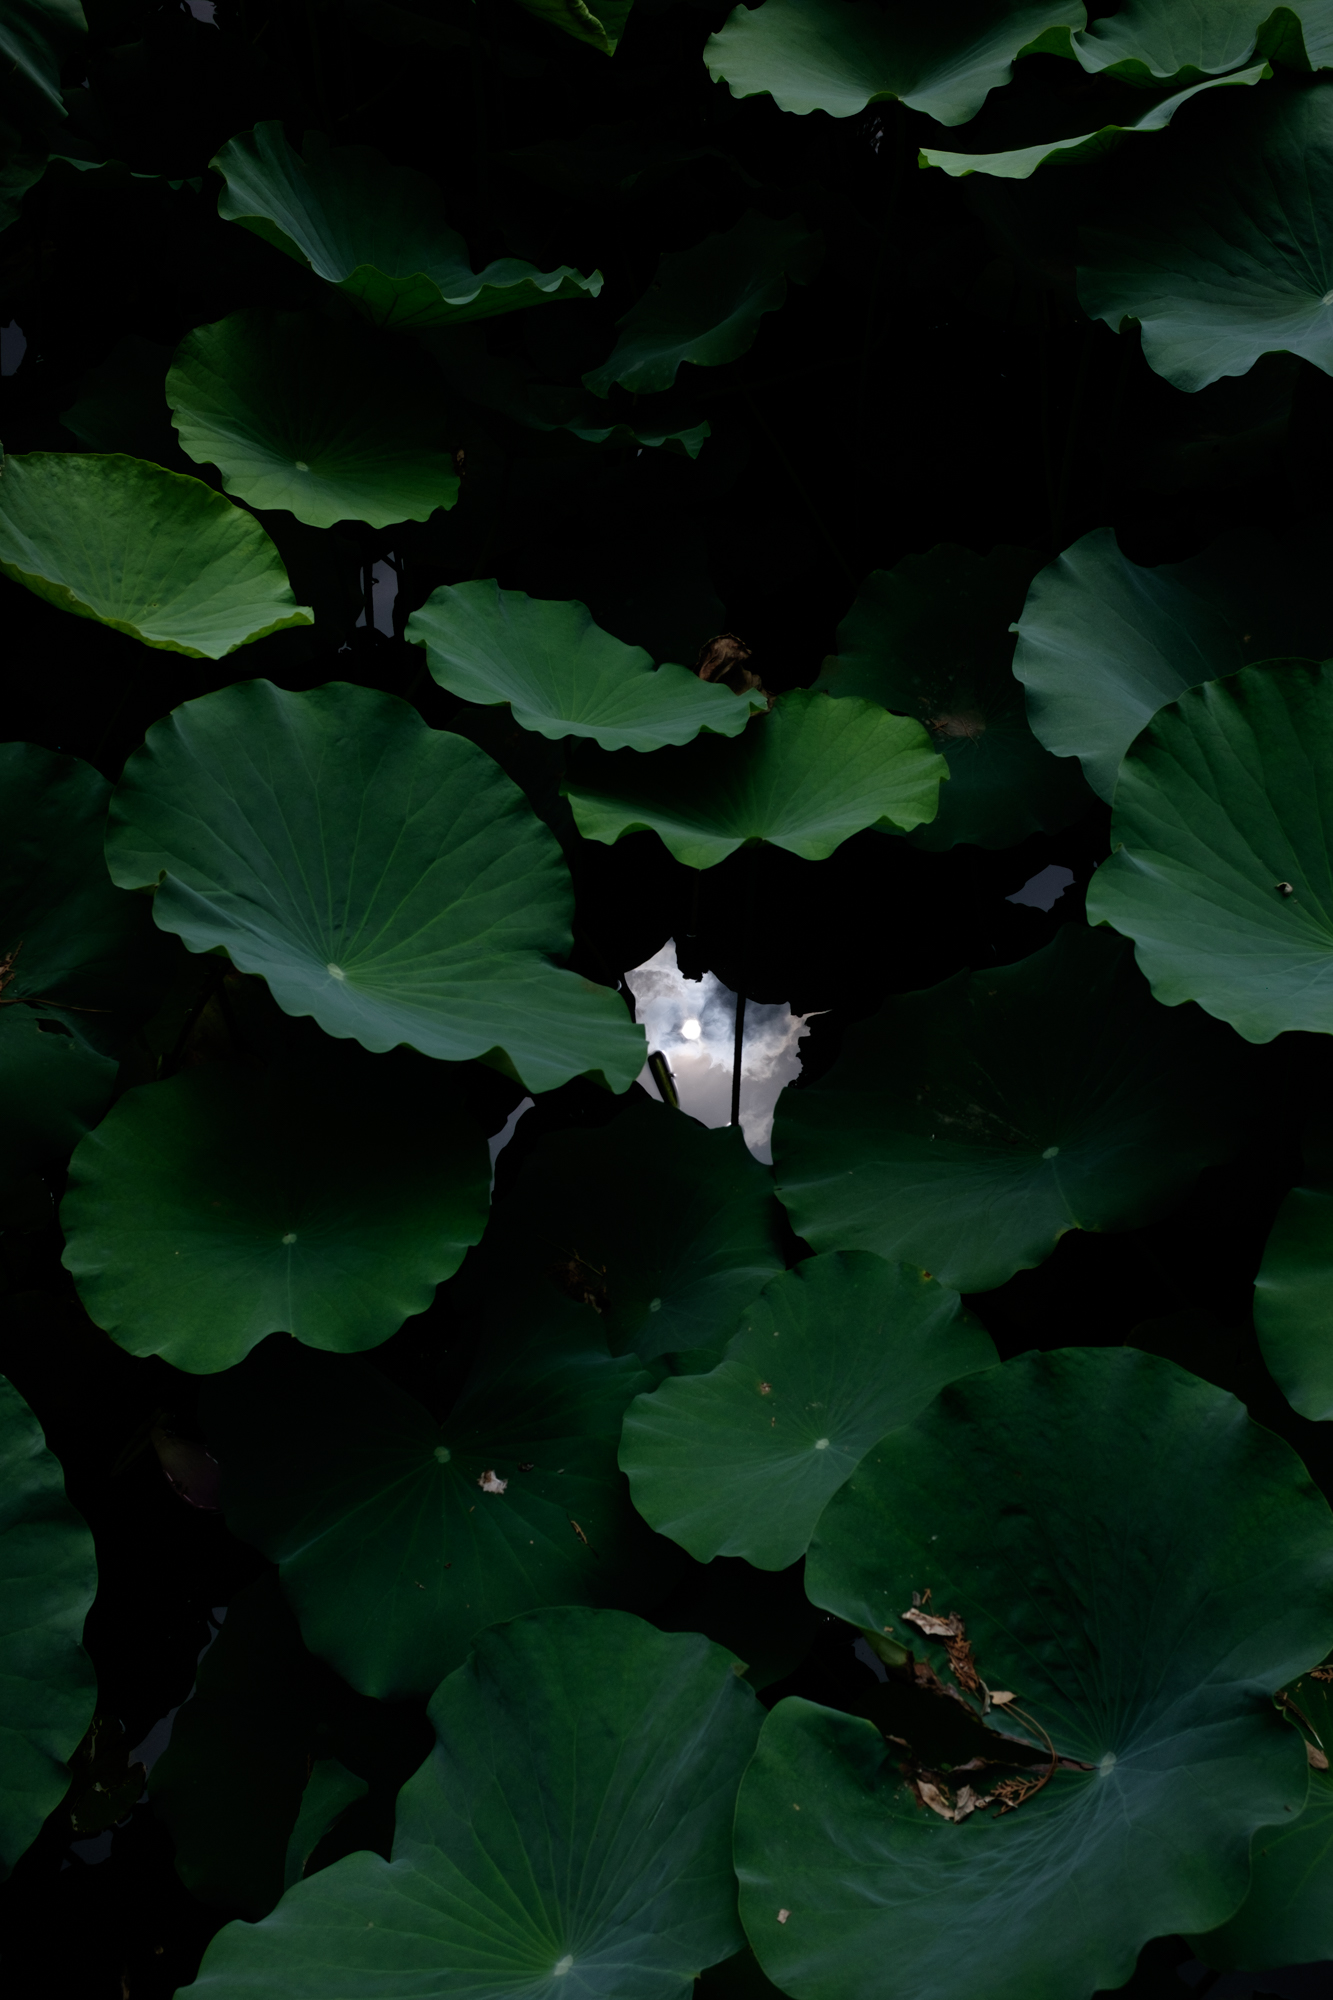  The sun reflected in a lily pond at the Summer Palace, Beijing, August 2017 